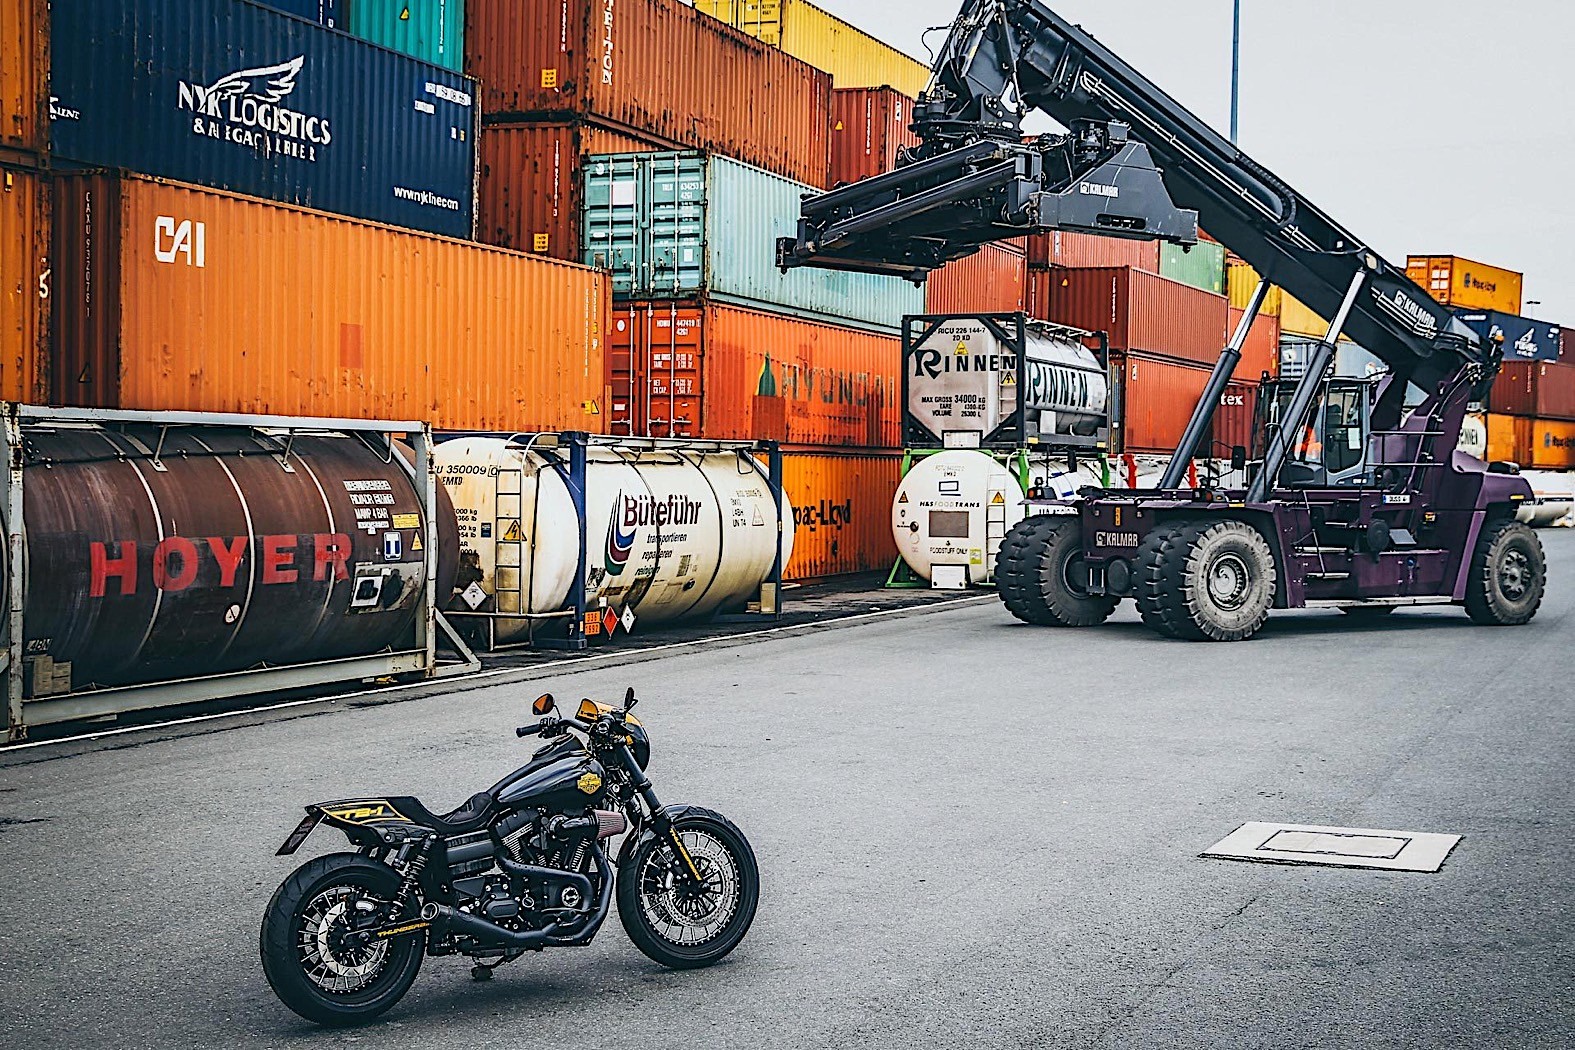 A Harley-Davidson TB 1 superbike in front of a series of shipping containers